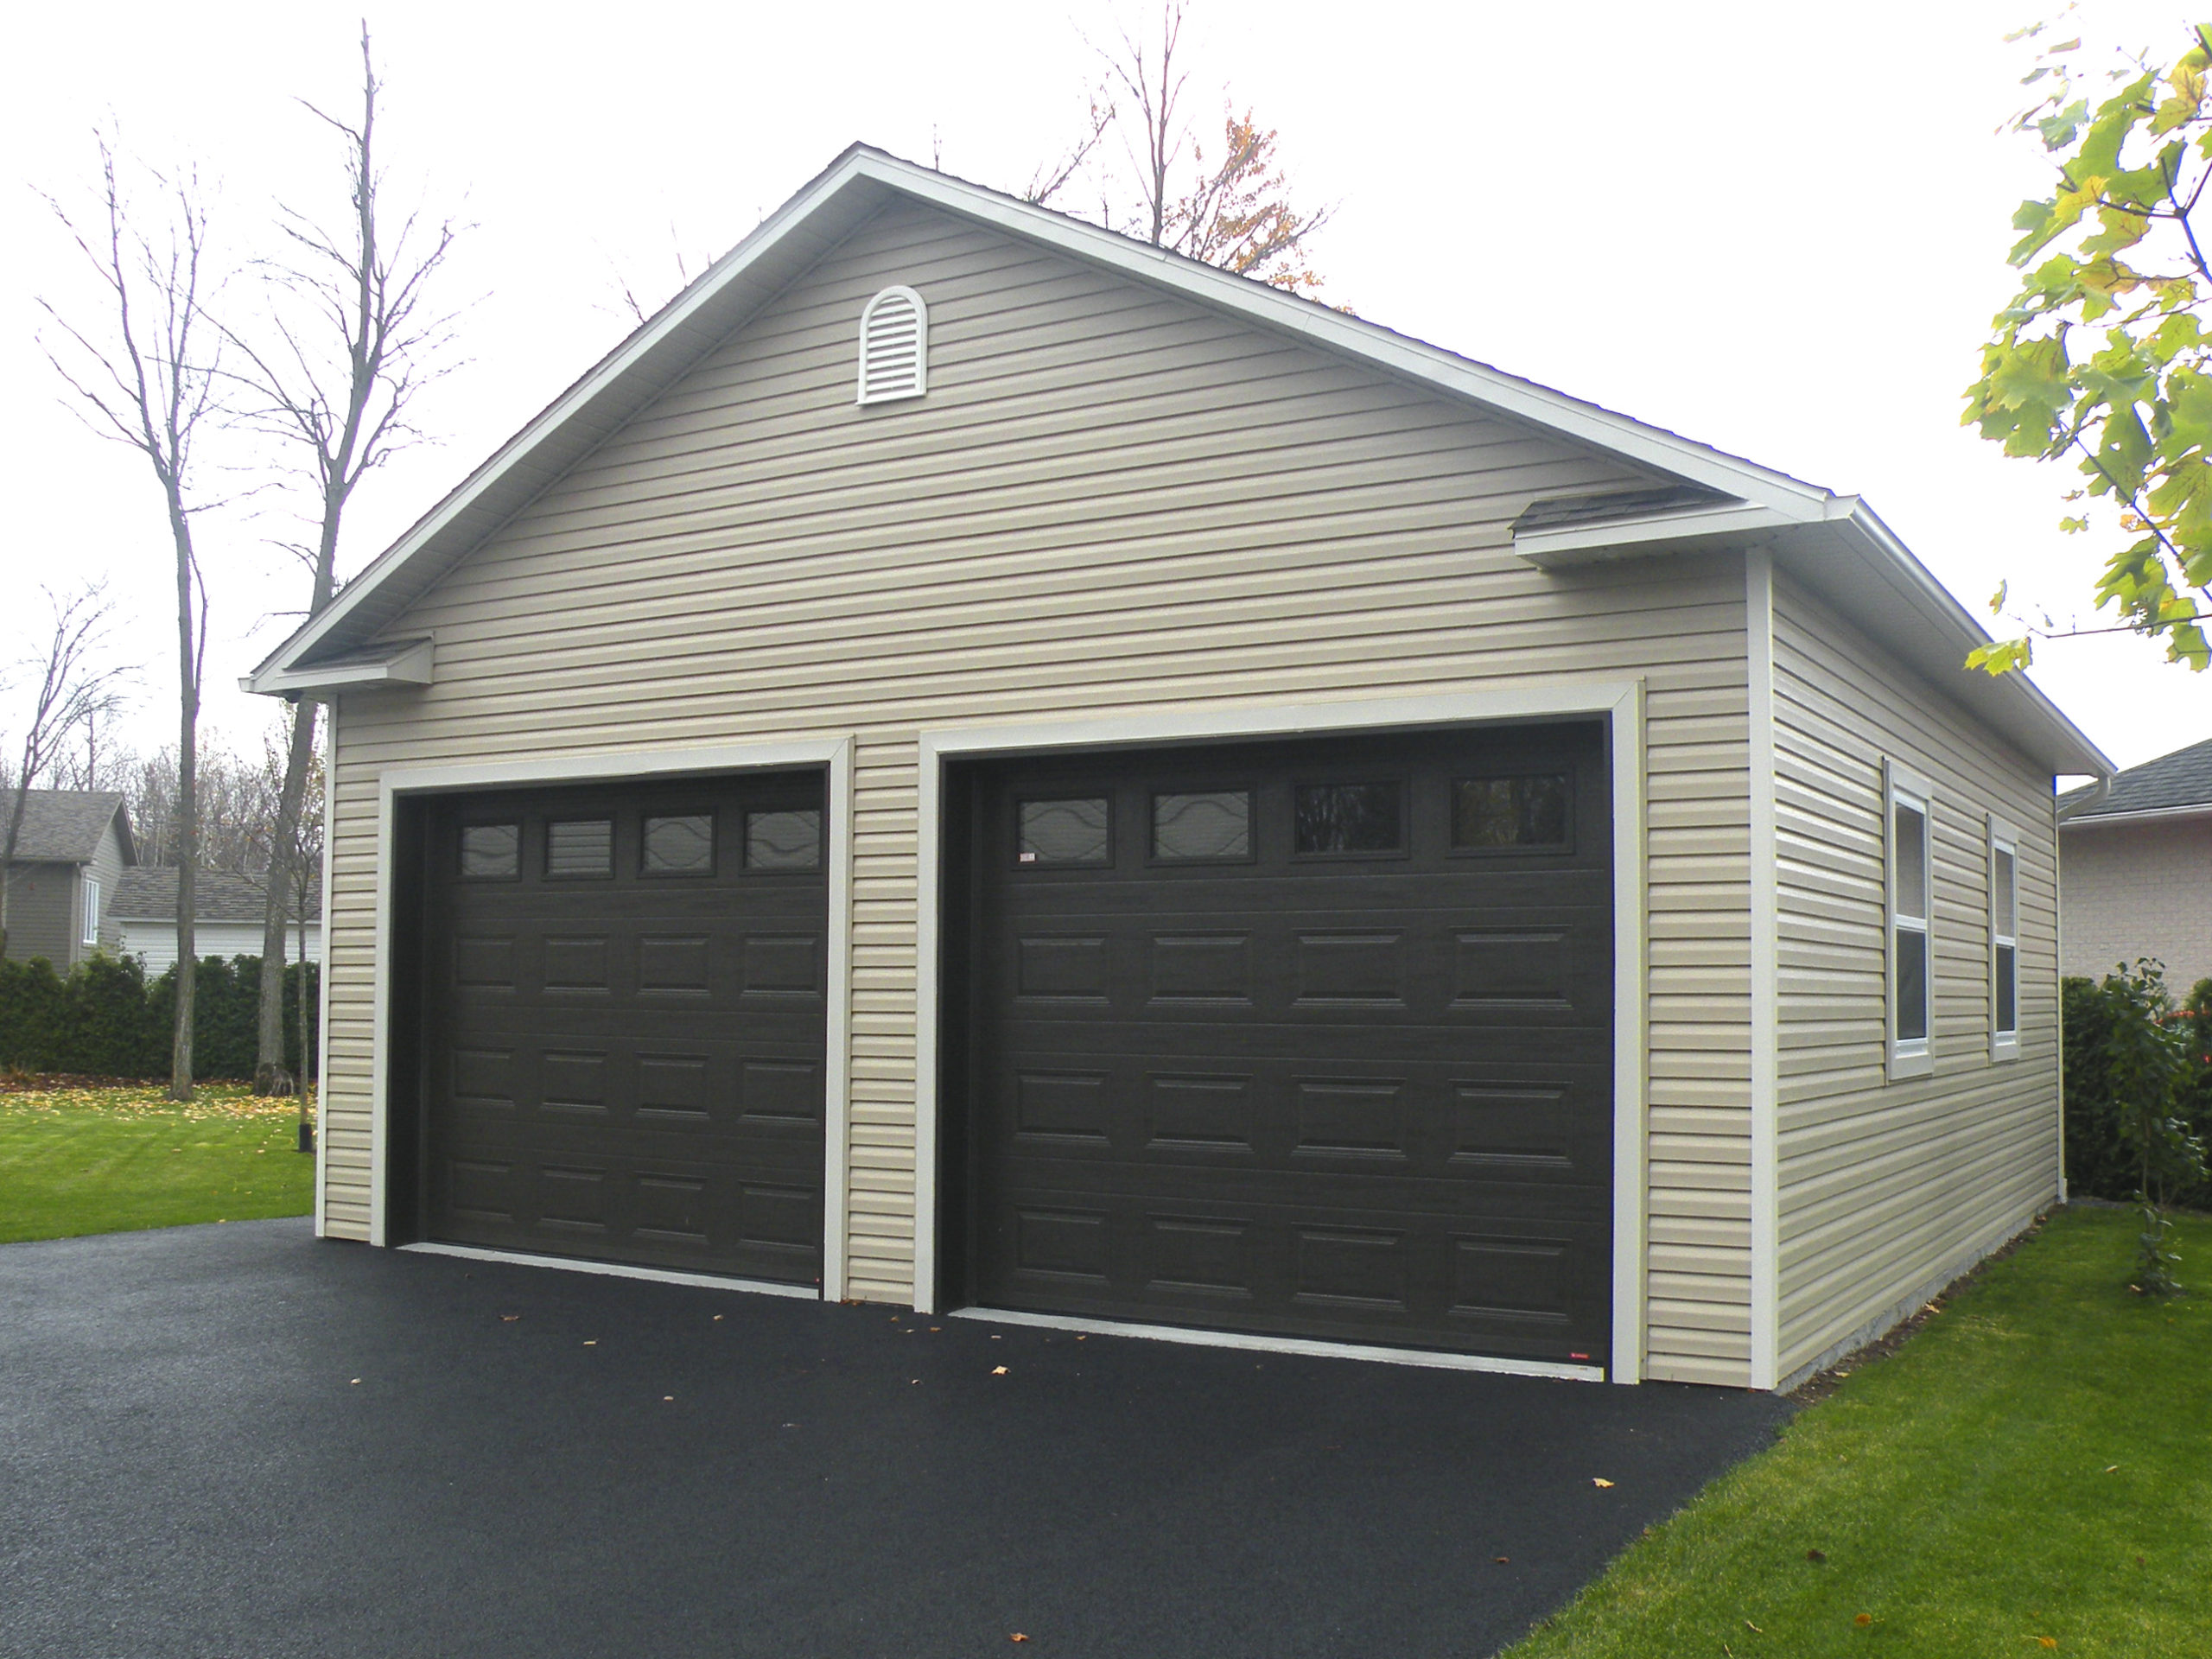 Sale, repair and installation of small custom garage doors for sheds in Montreal, Montreal-West, Montreal-East, Laval and on the North Shore and its surroundings - Montreal Garage Doors - Portes de Garage Supérieur Inc. located in Ville Saint-Laurent in Montreal